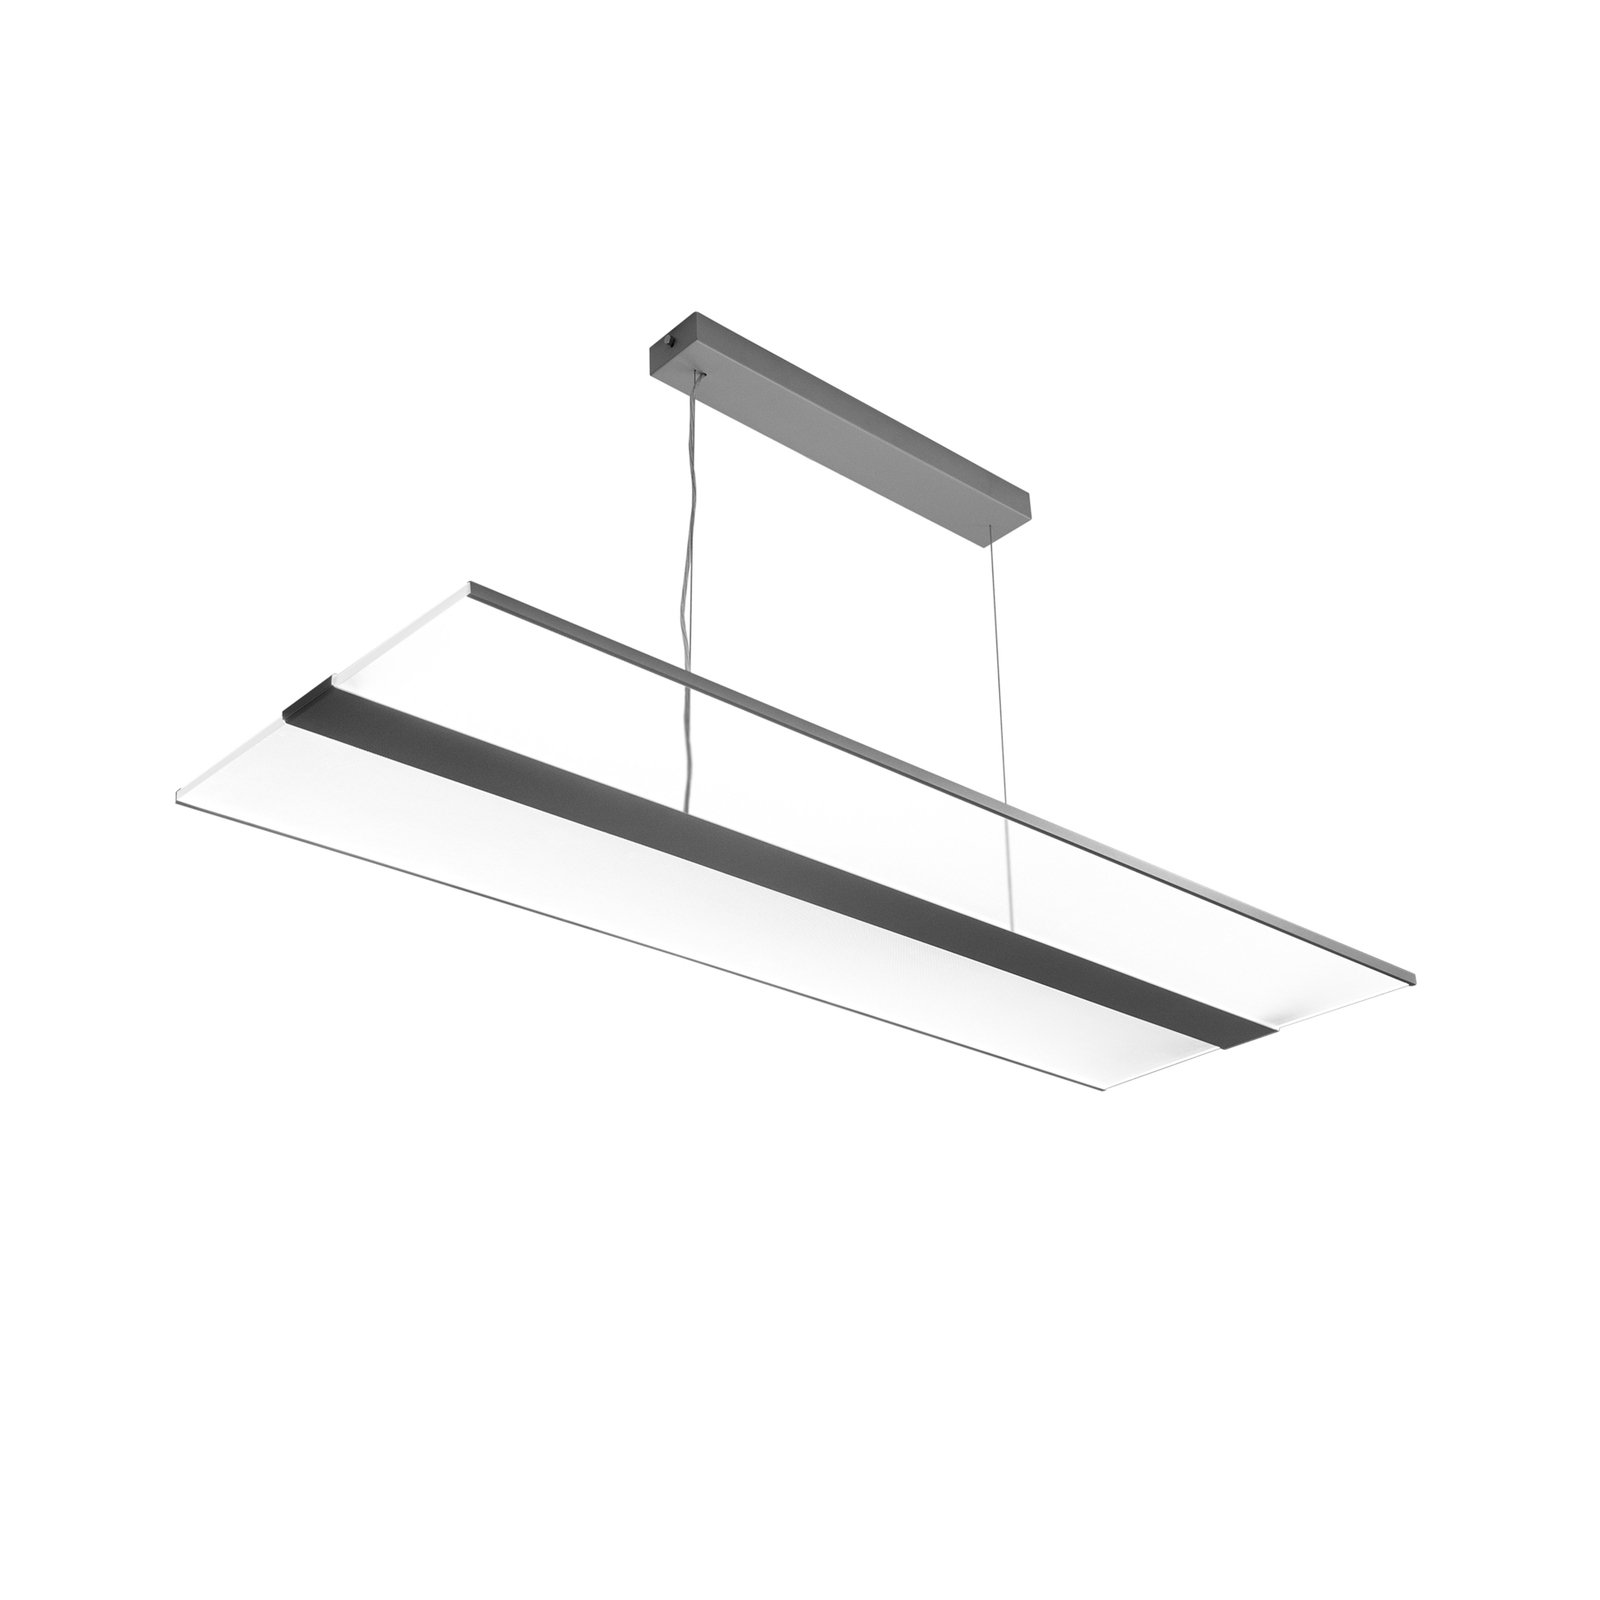 LED pendant light FLY6000 up/down on/off 63W 840